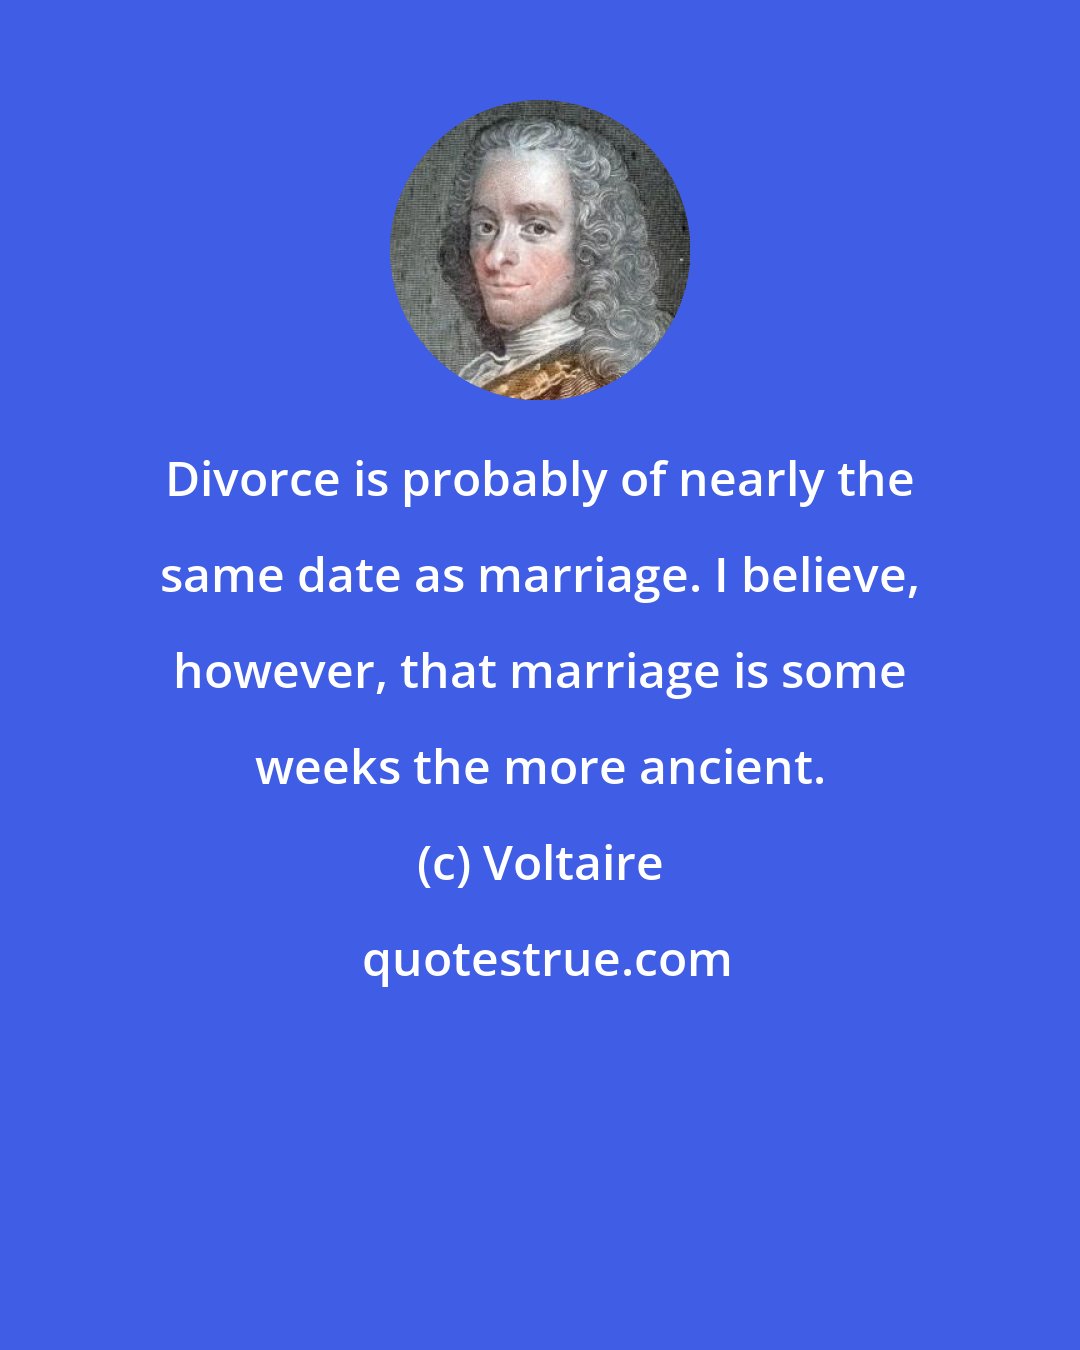 Voltaire: Divorce is probably of nearly the same date as marriage. I believe, however, that marriage is some weeks the more ancient.